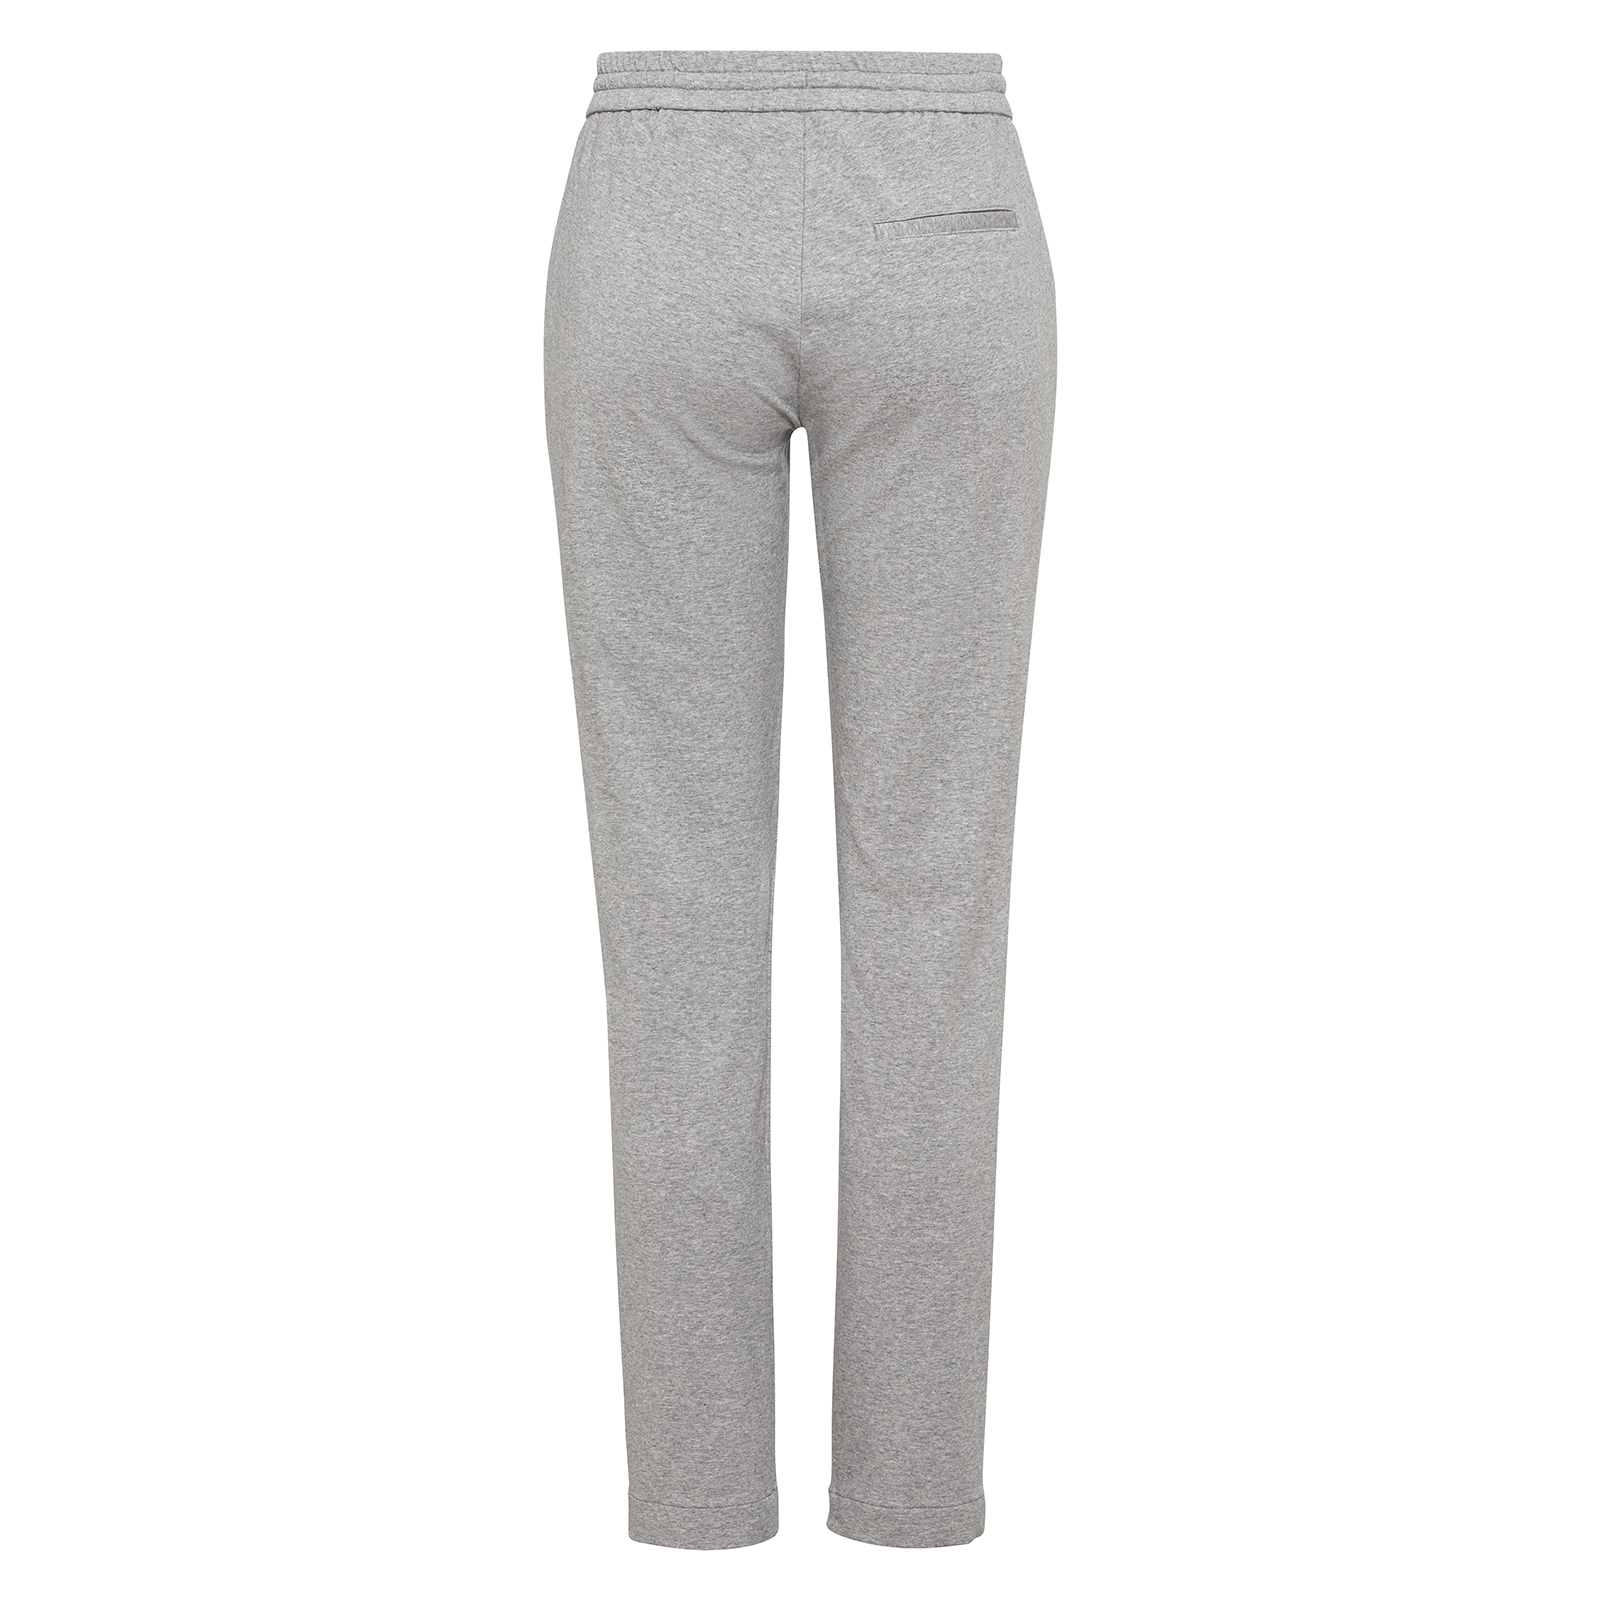 Comfortable ladies' four-way stretch trousers